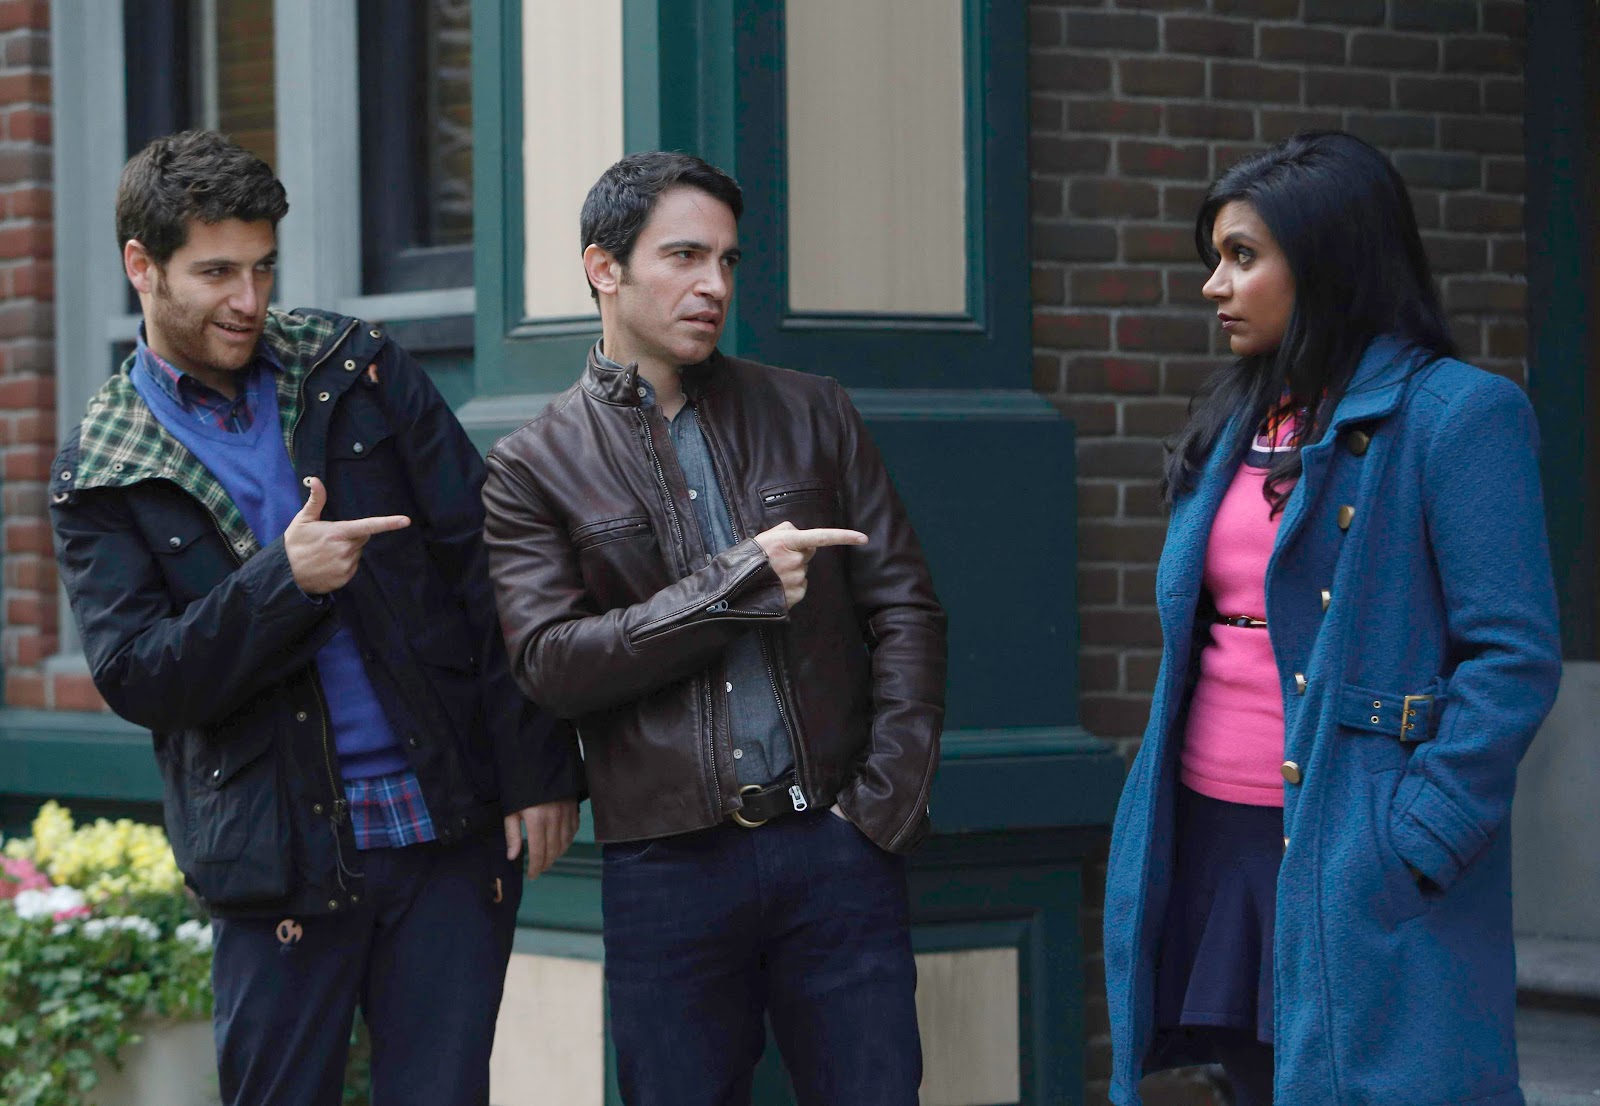 The Mindy Project - Episode 2.17 - 2.18 - Promotional Photos